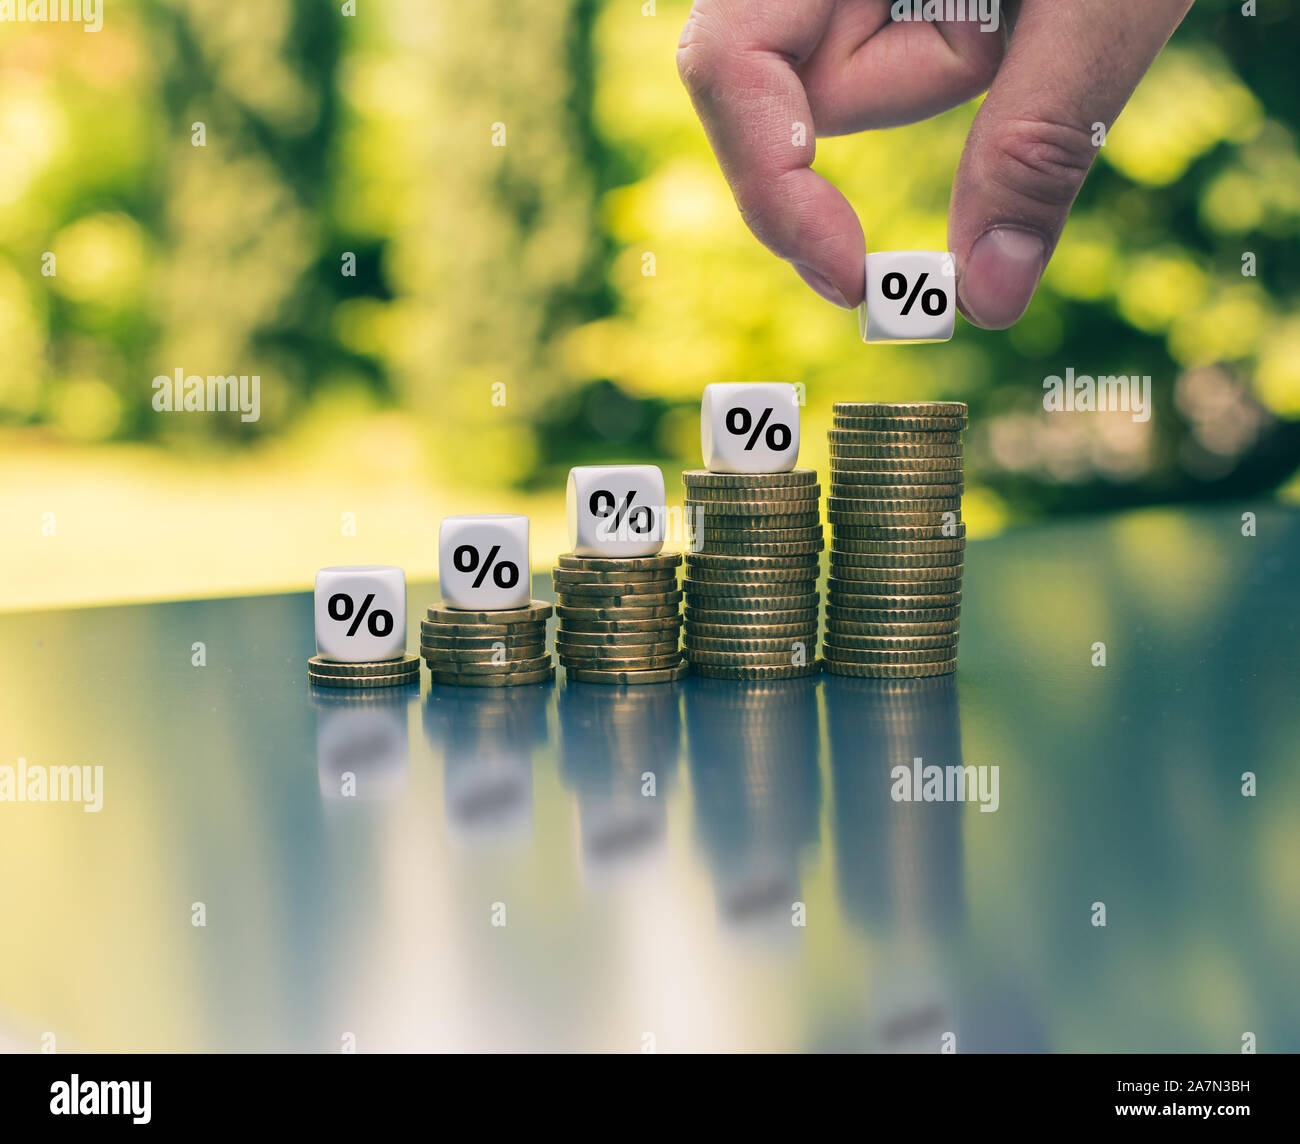 Percentage signs on increasing high stacks of coins. Stock Photo